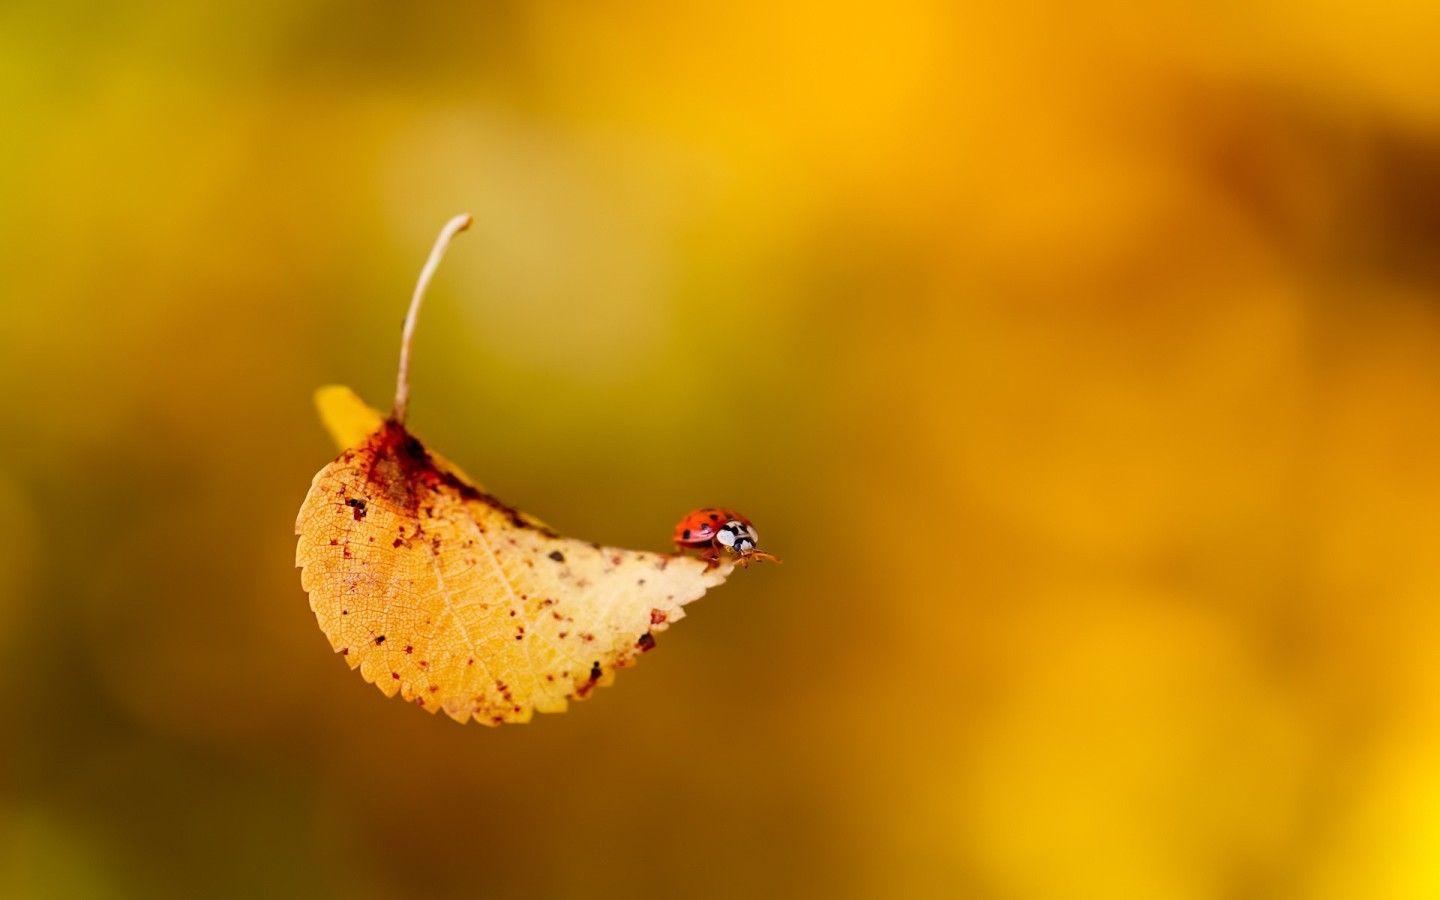 Falling Leaf and Lady Bug widescreen wallpaper. Wide